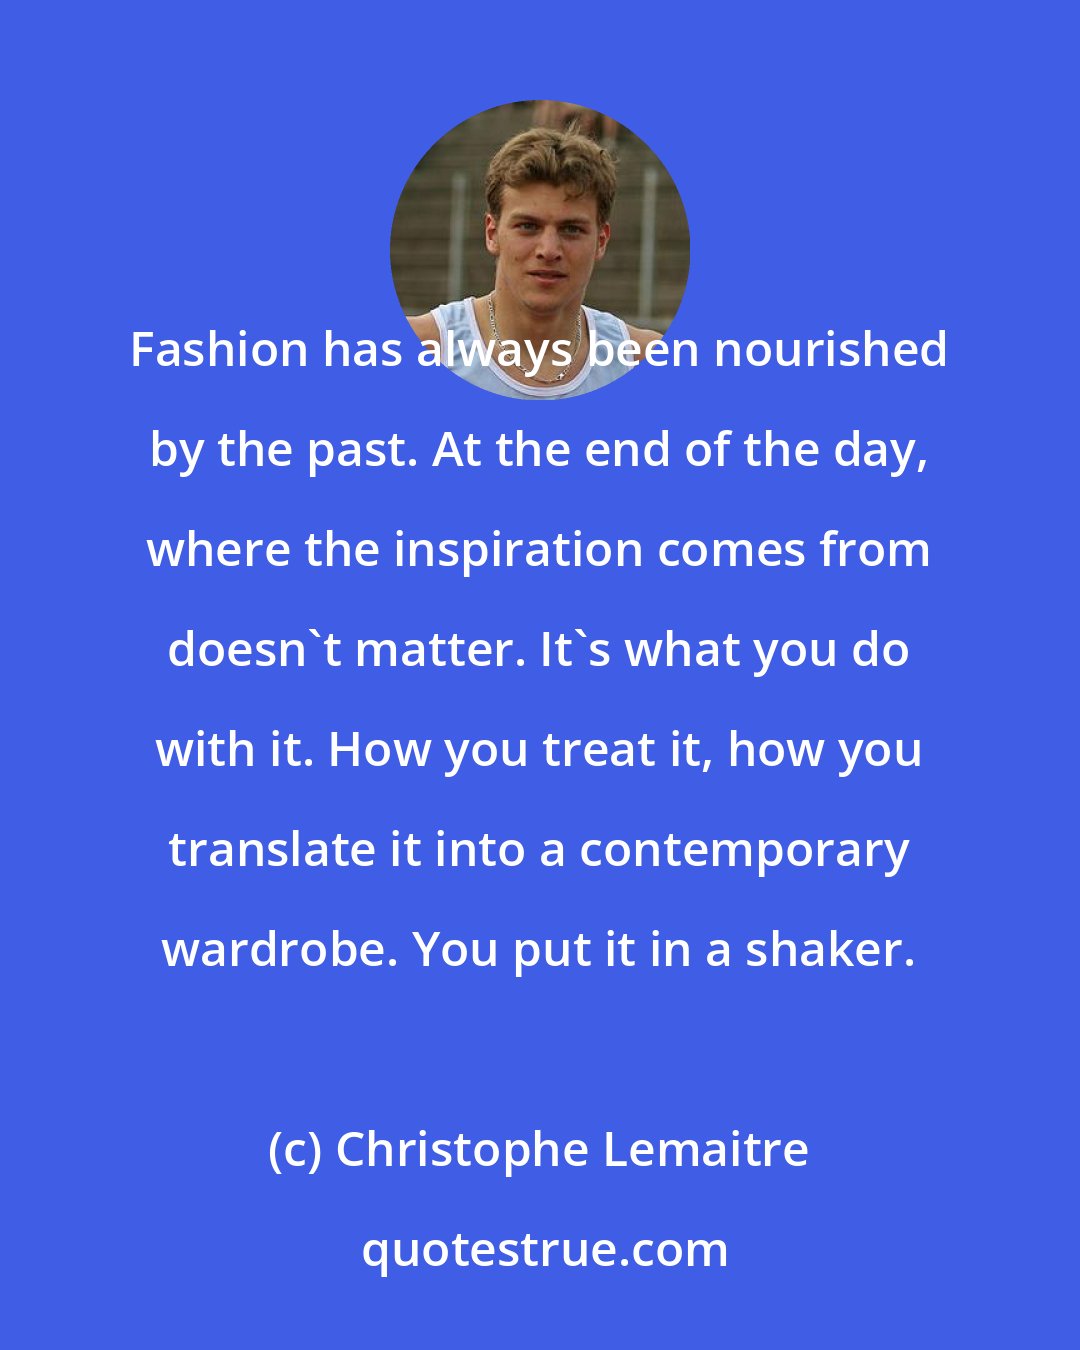 Christophe Lemaitre: Fashion has always been nourished by the past. At the end of the day, where the inspiration comes from doesn't matter. It's what you do with it. How you treat it, how you translate it into a contemporary wardrobe. You put it in a shaker.